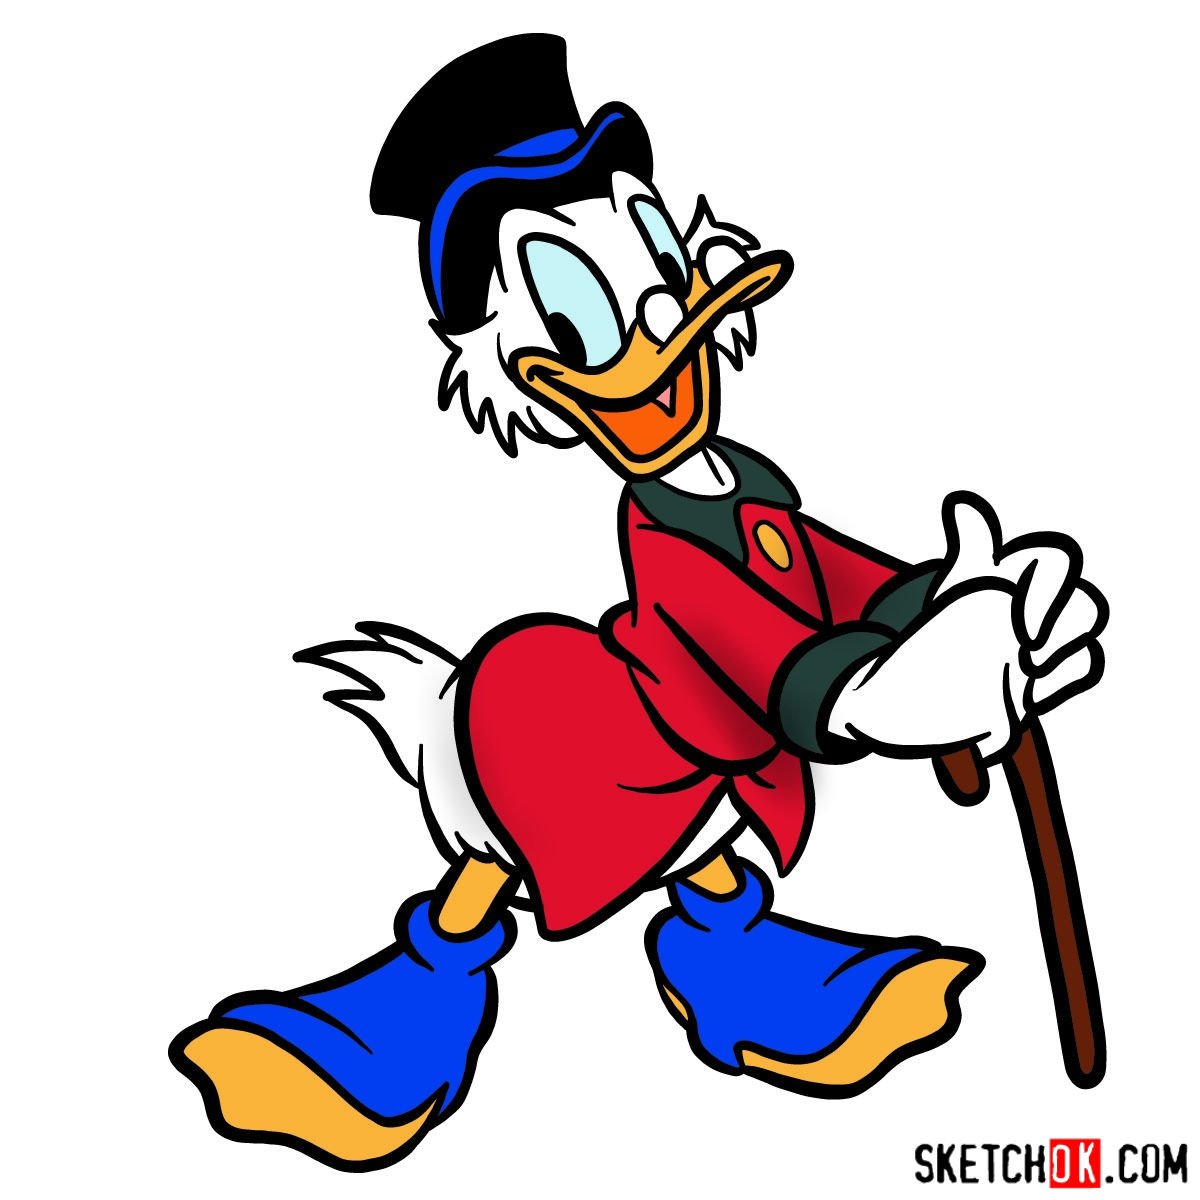 How to draw Scrooge McDuck